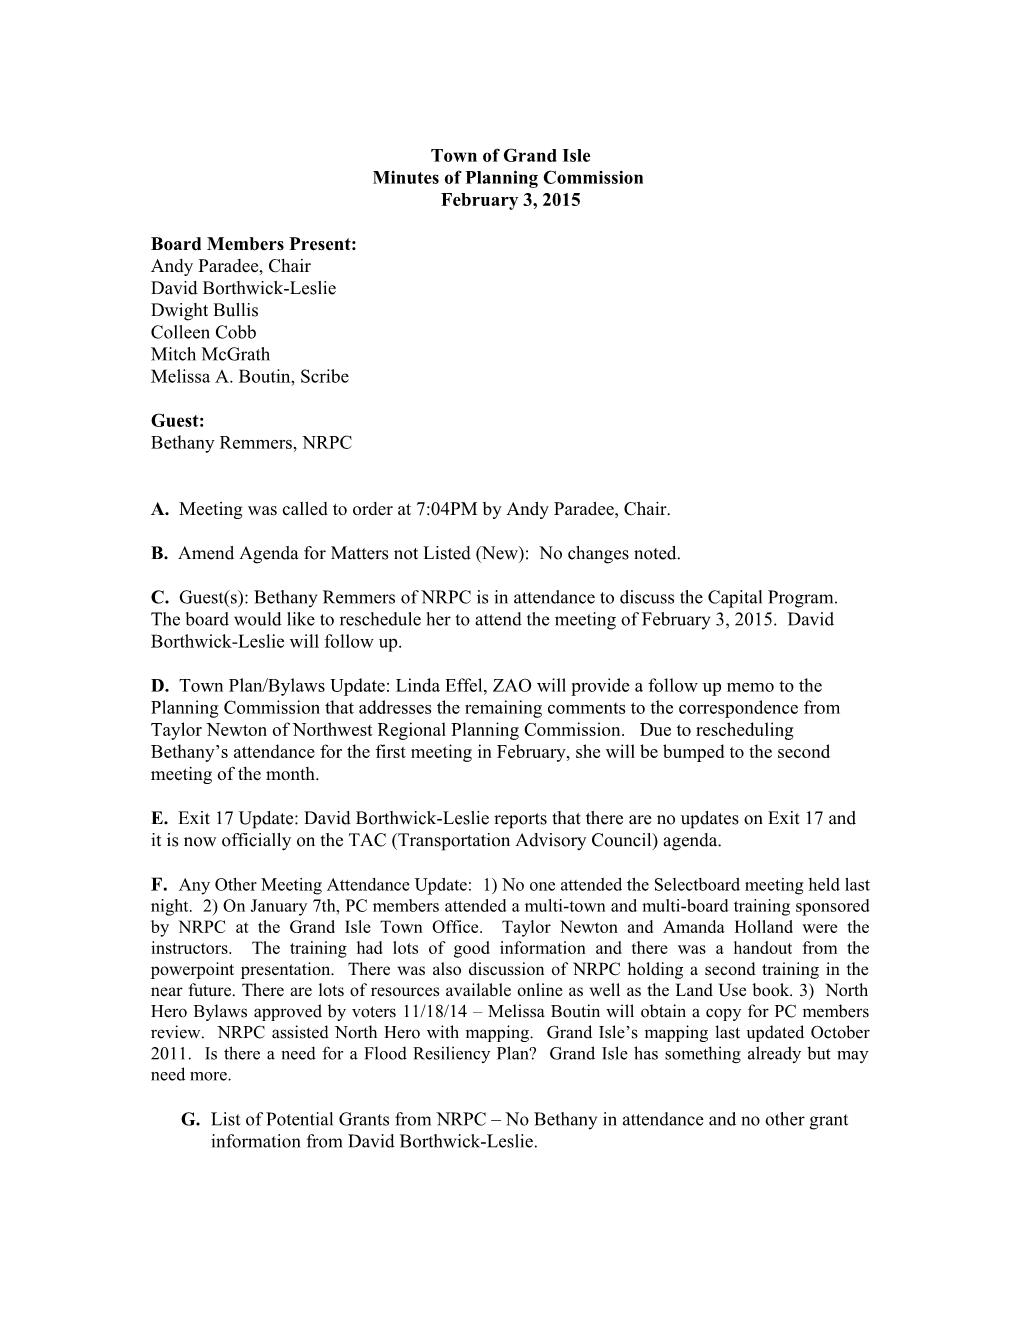 Minutes of Grand Isle Planning Commission November 18, 2014 s1